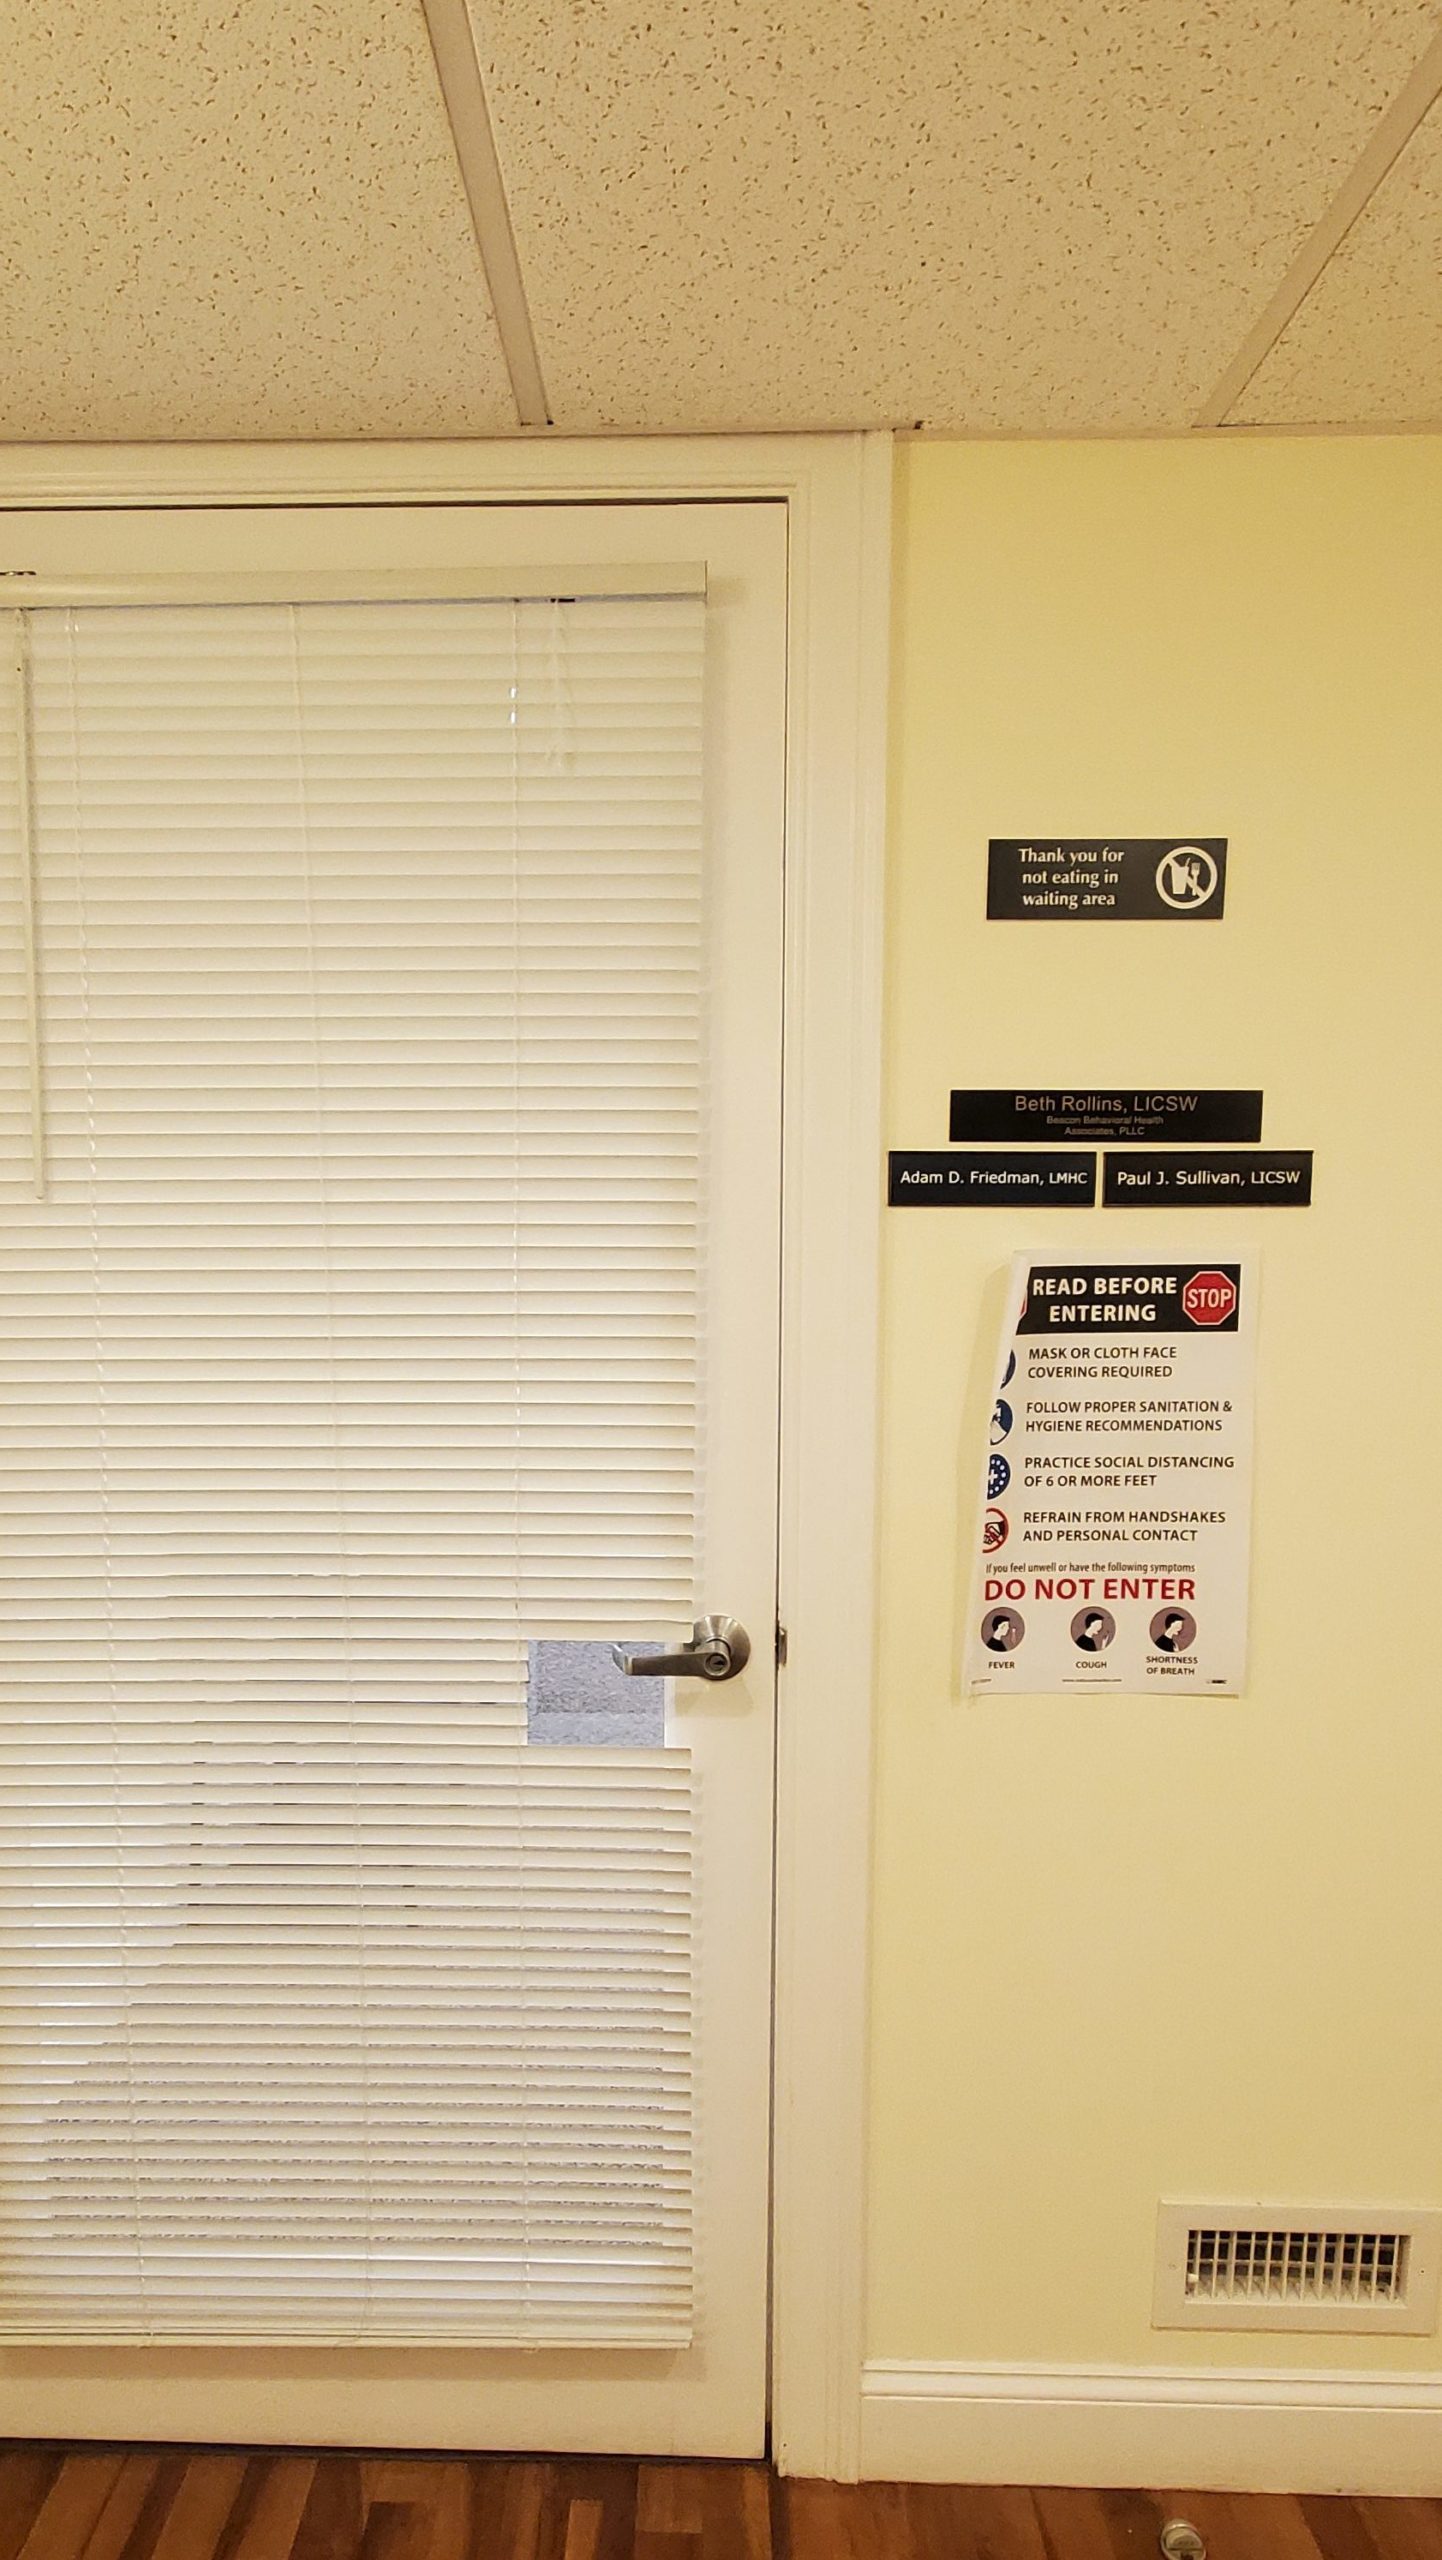 The door to the waiting room. The door has a glass window in it and white blinds prevent people from looking inside the room. On the right hand side are three name plates, a sign asking people to not eat in the waiting area, and a sign asking people to wear face masks. 